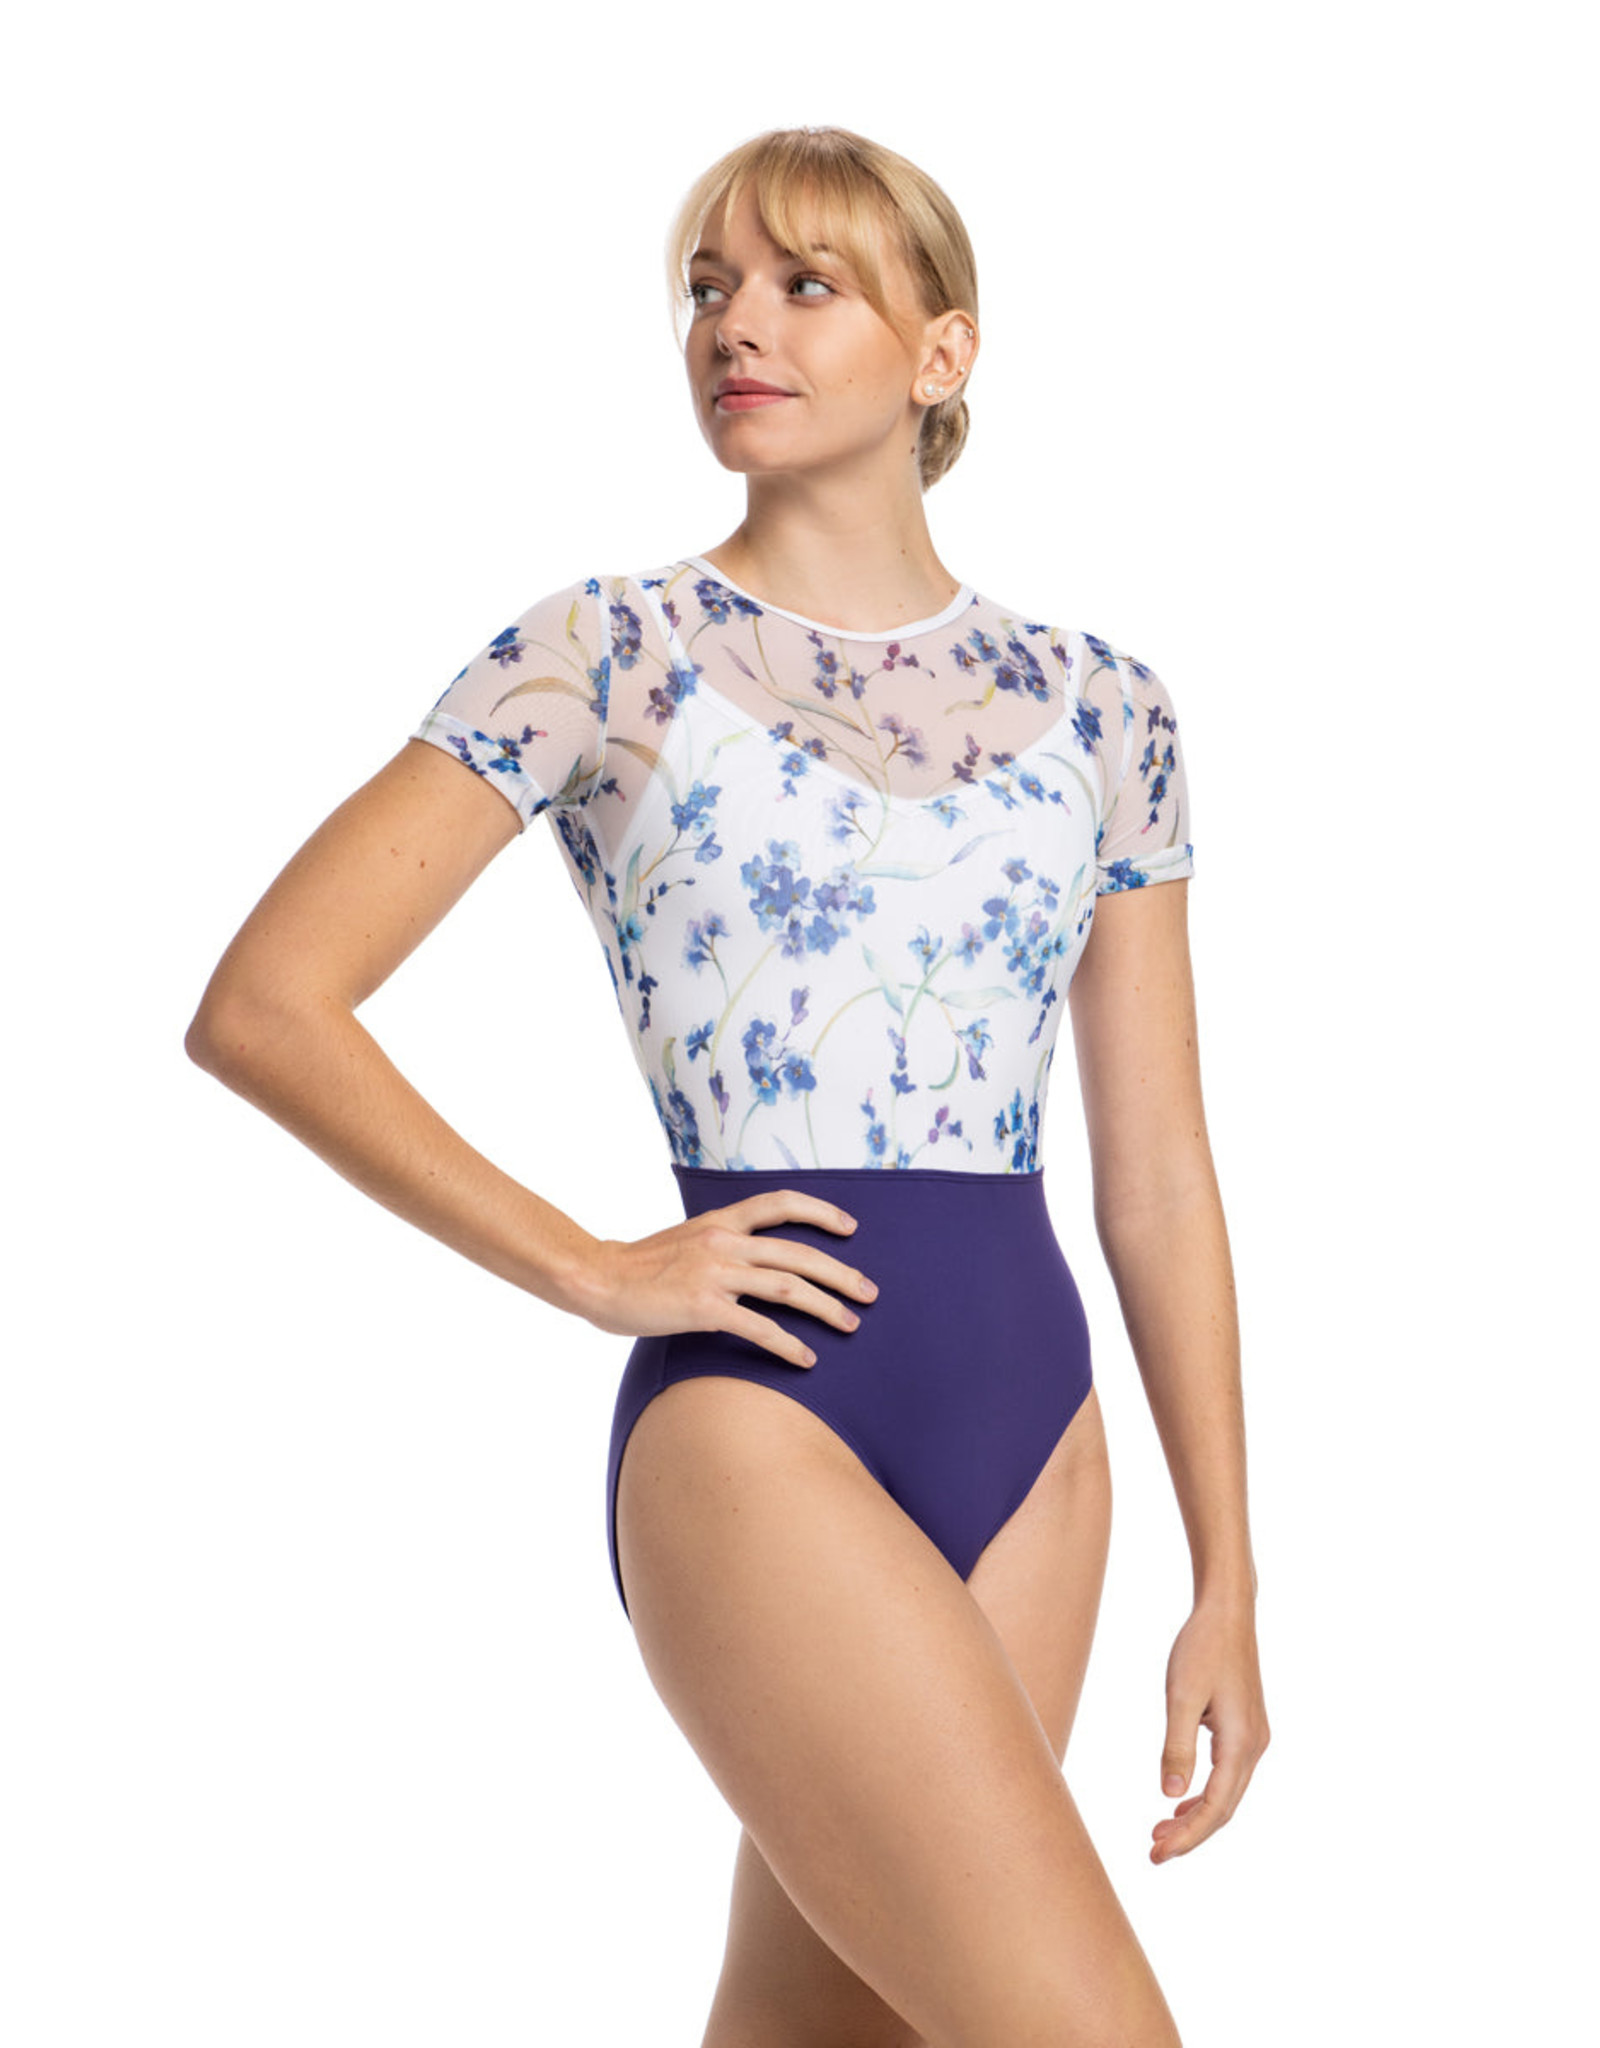 AINSLIEWEAR ADINA LEOTARD WITH FORGET ME NOT PRINT